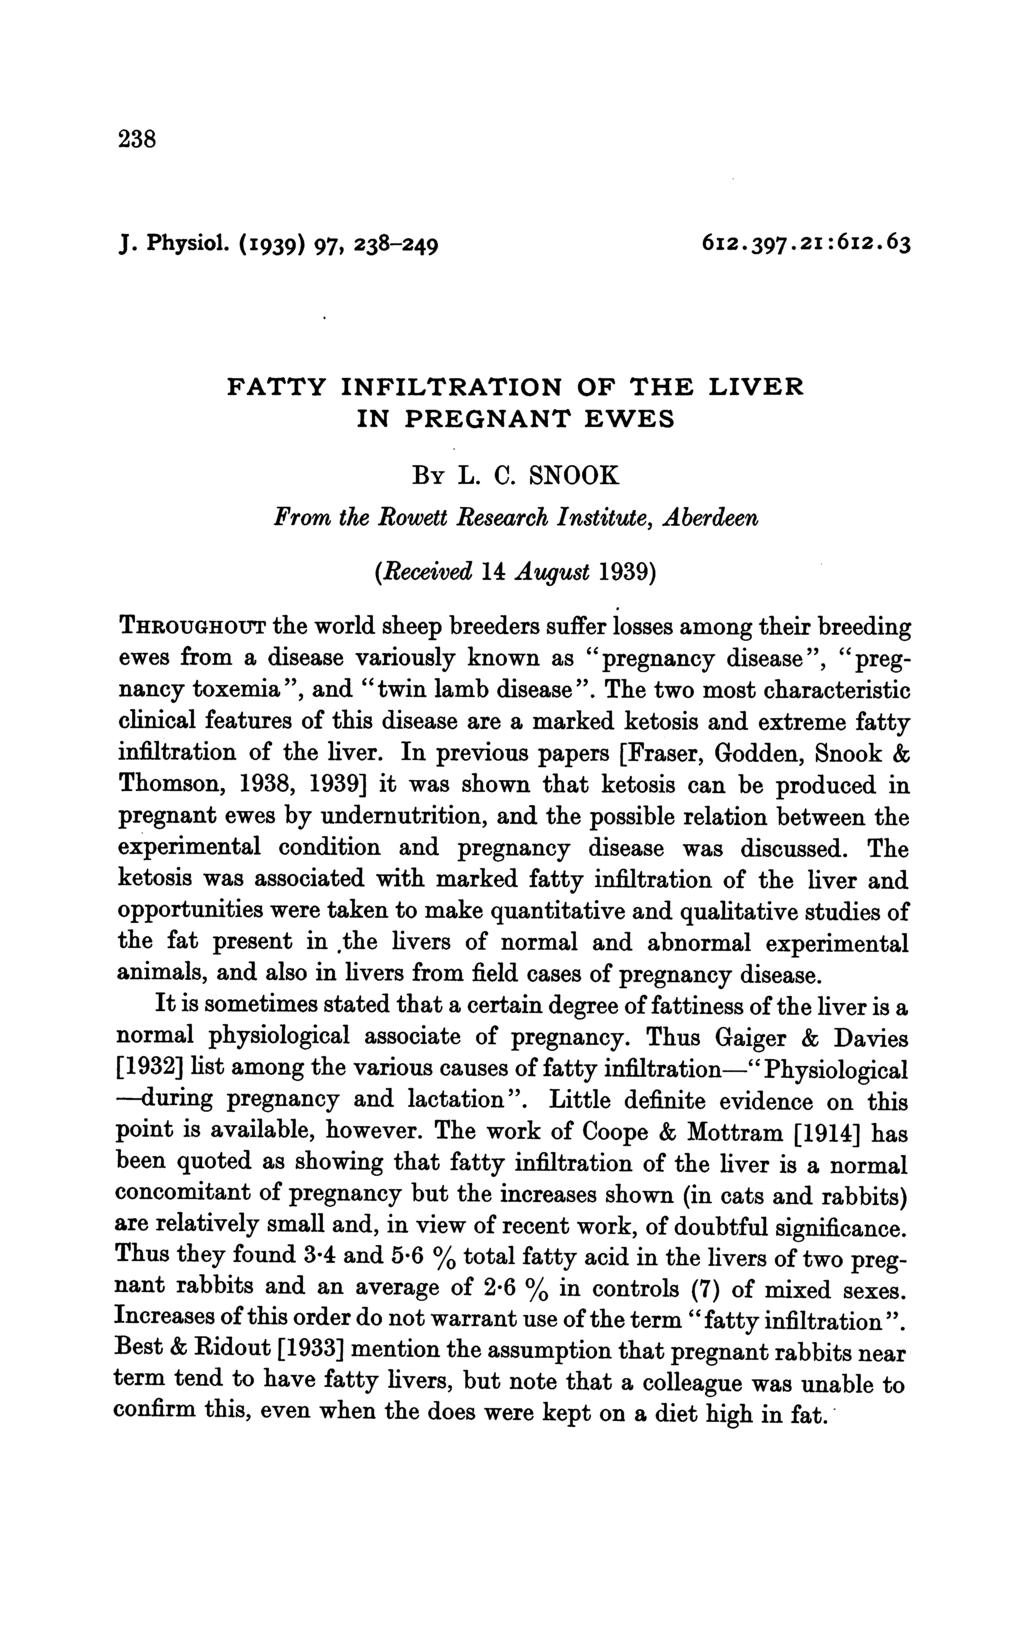 238 J. Physiol. (I939) 97, 238-249 6I2.397.2I:6I2.63 FATTY INFILTRATION OF THE LIVER IN PREGNANT EWES By L. C.